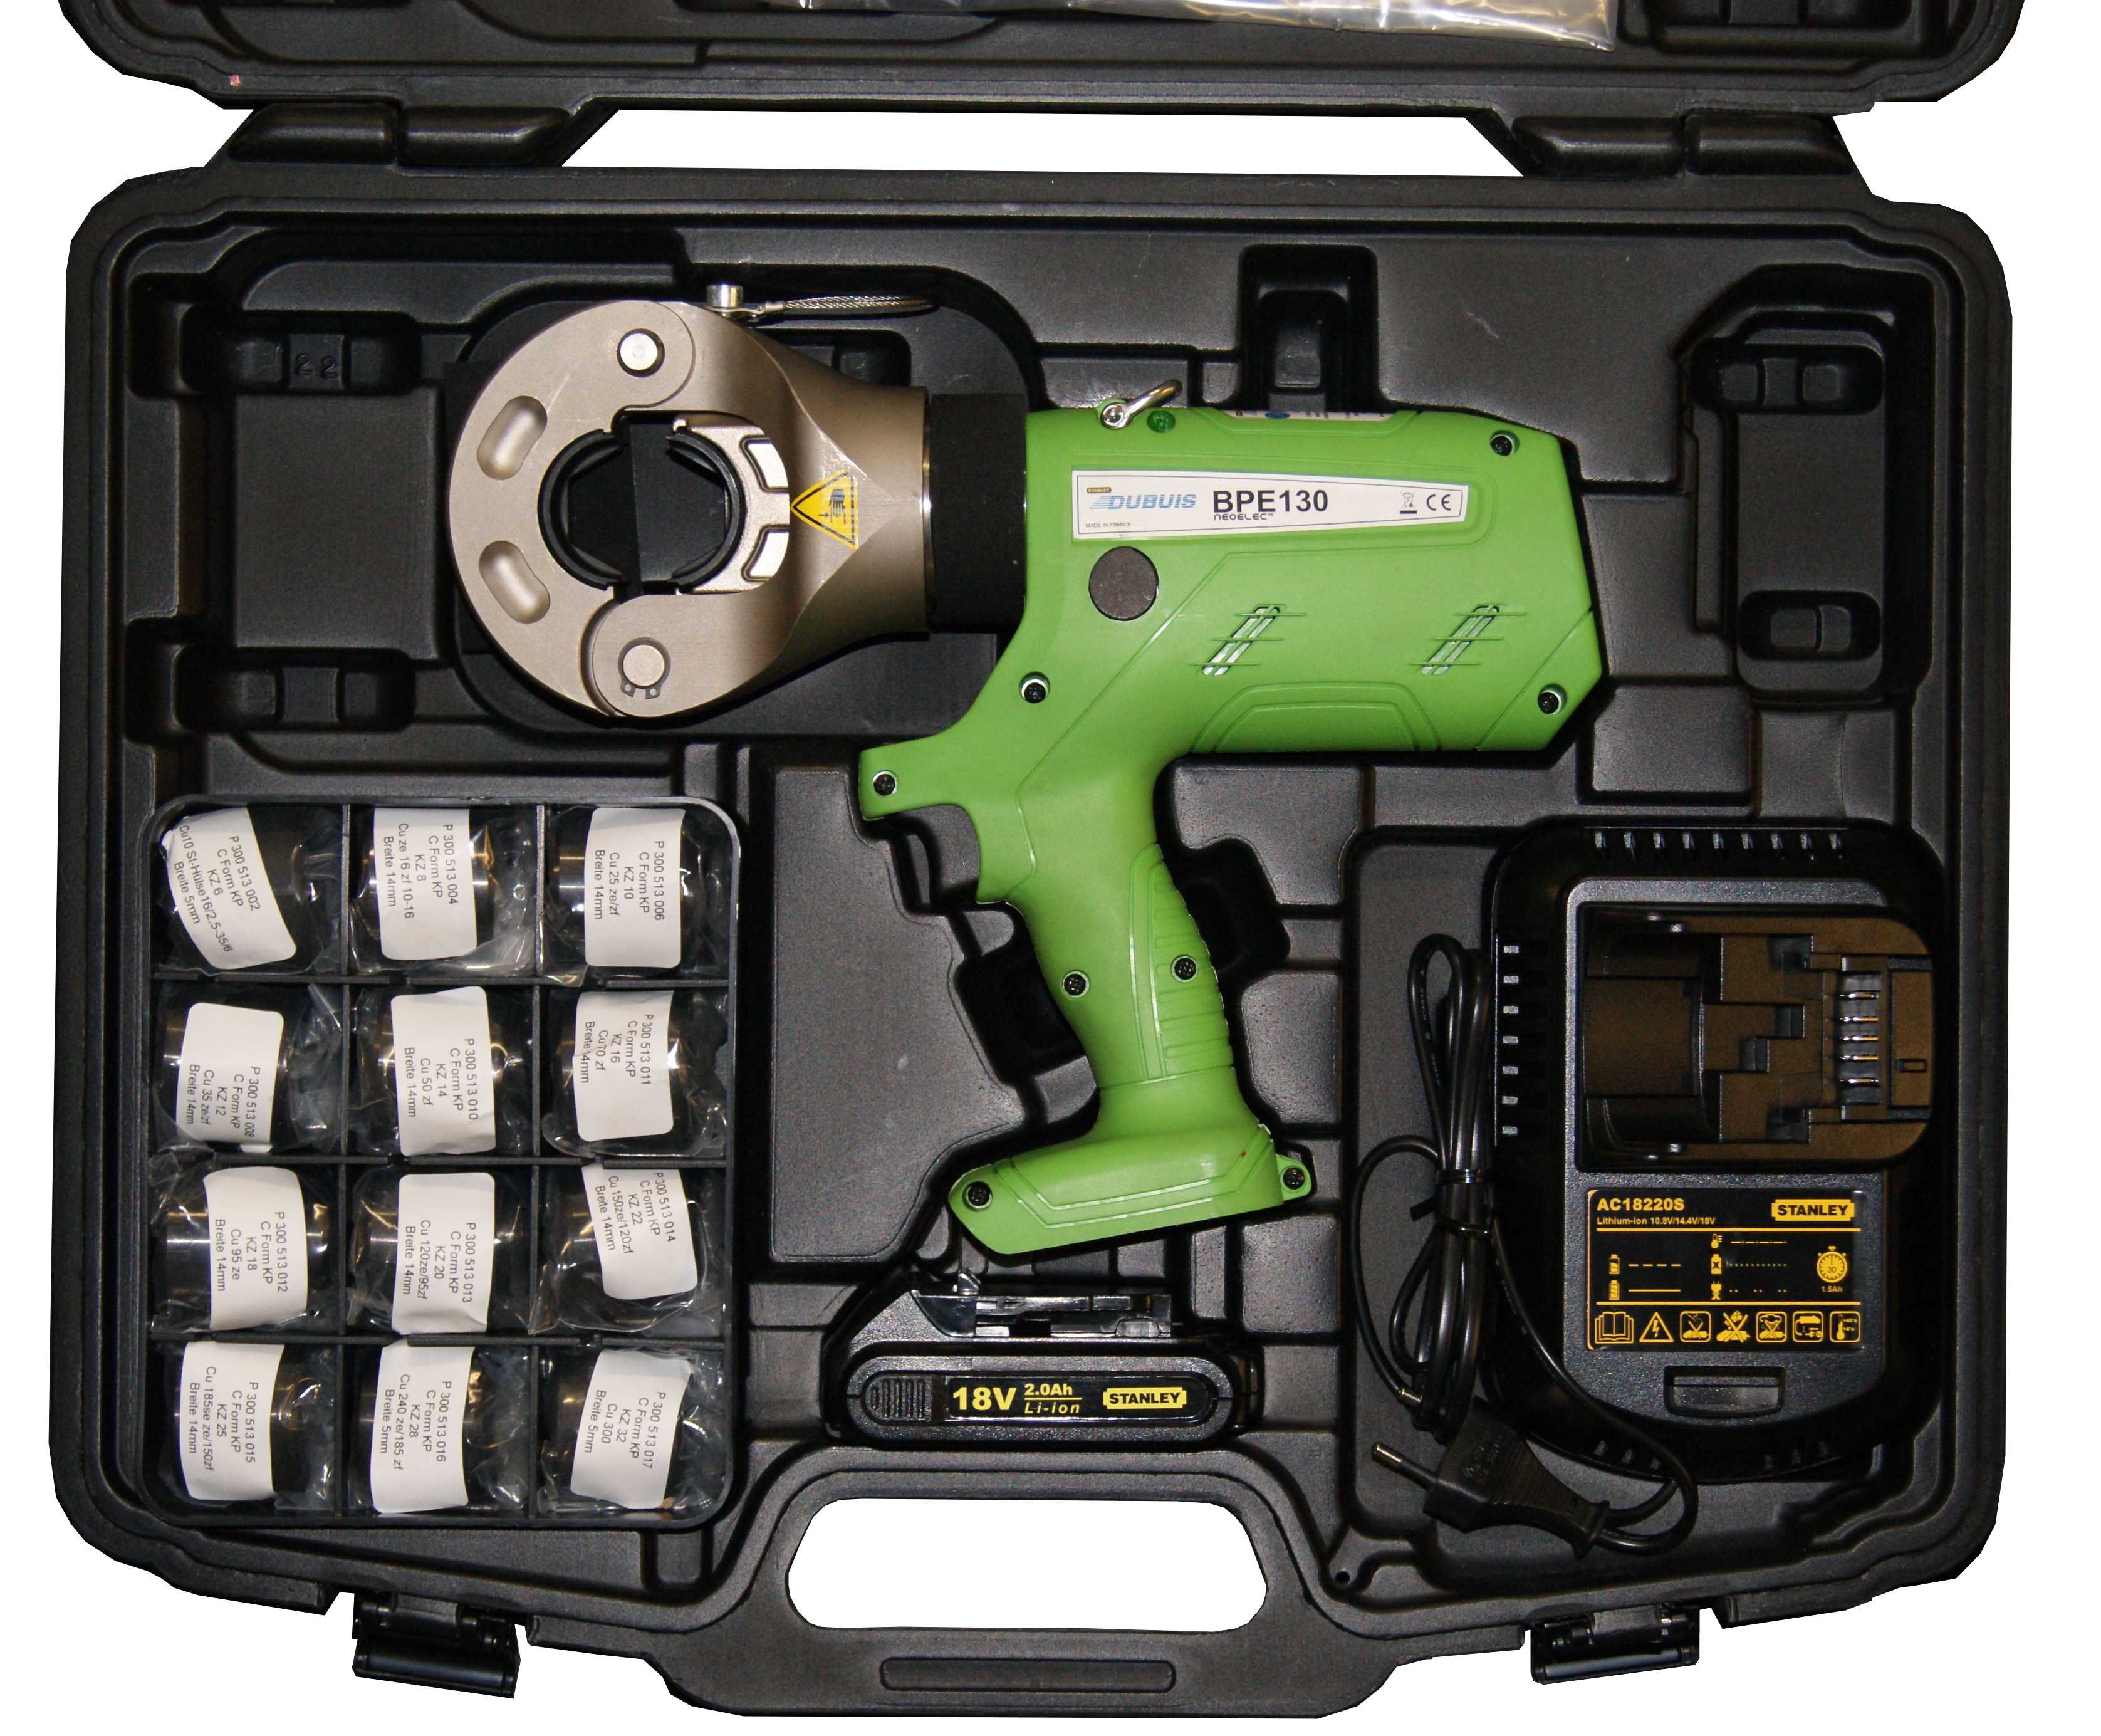 BPE130 - Battery hydraulic crimping tool, 130 kN, for inserts series "130-C" or "KLAUKE 13"